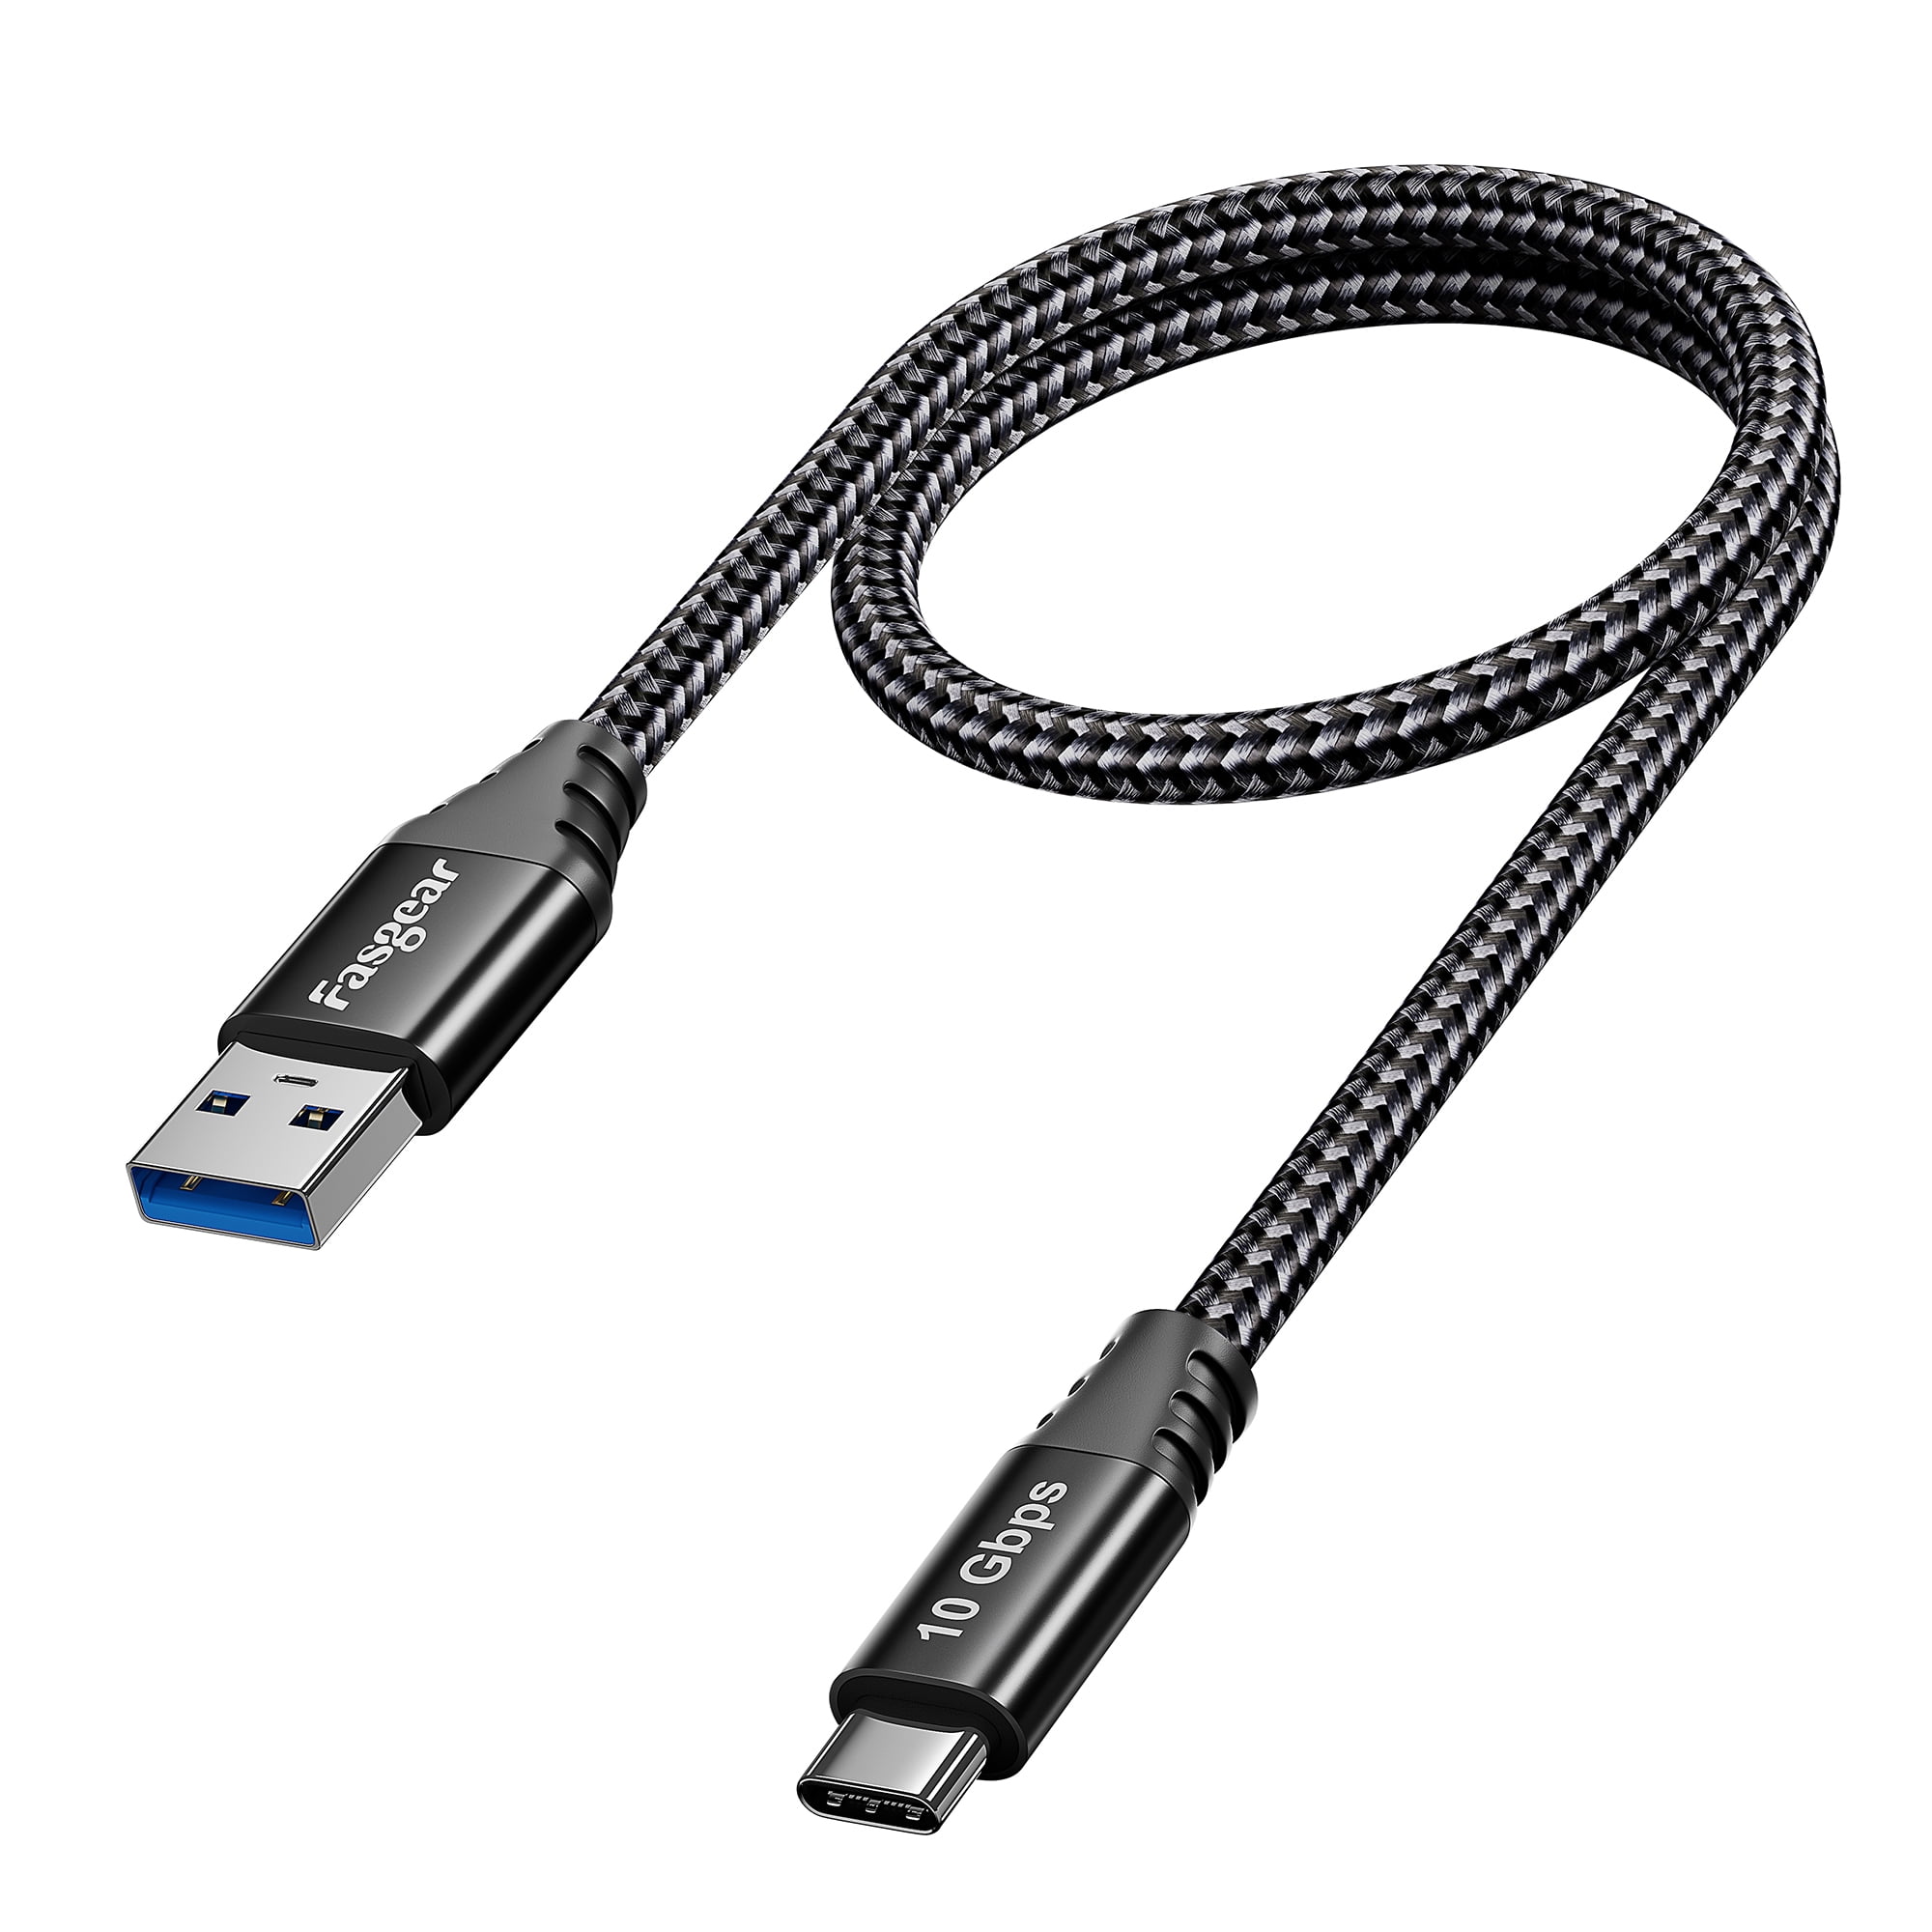 USB C Link Cable 14ft, Compatible for Oculus Link Cable Compatible for  Quest 1/2 to a Gaming PC, USB 3.2 Gen 1 5Gbps/3A